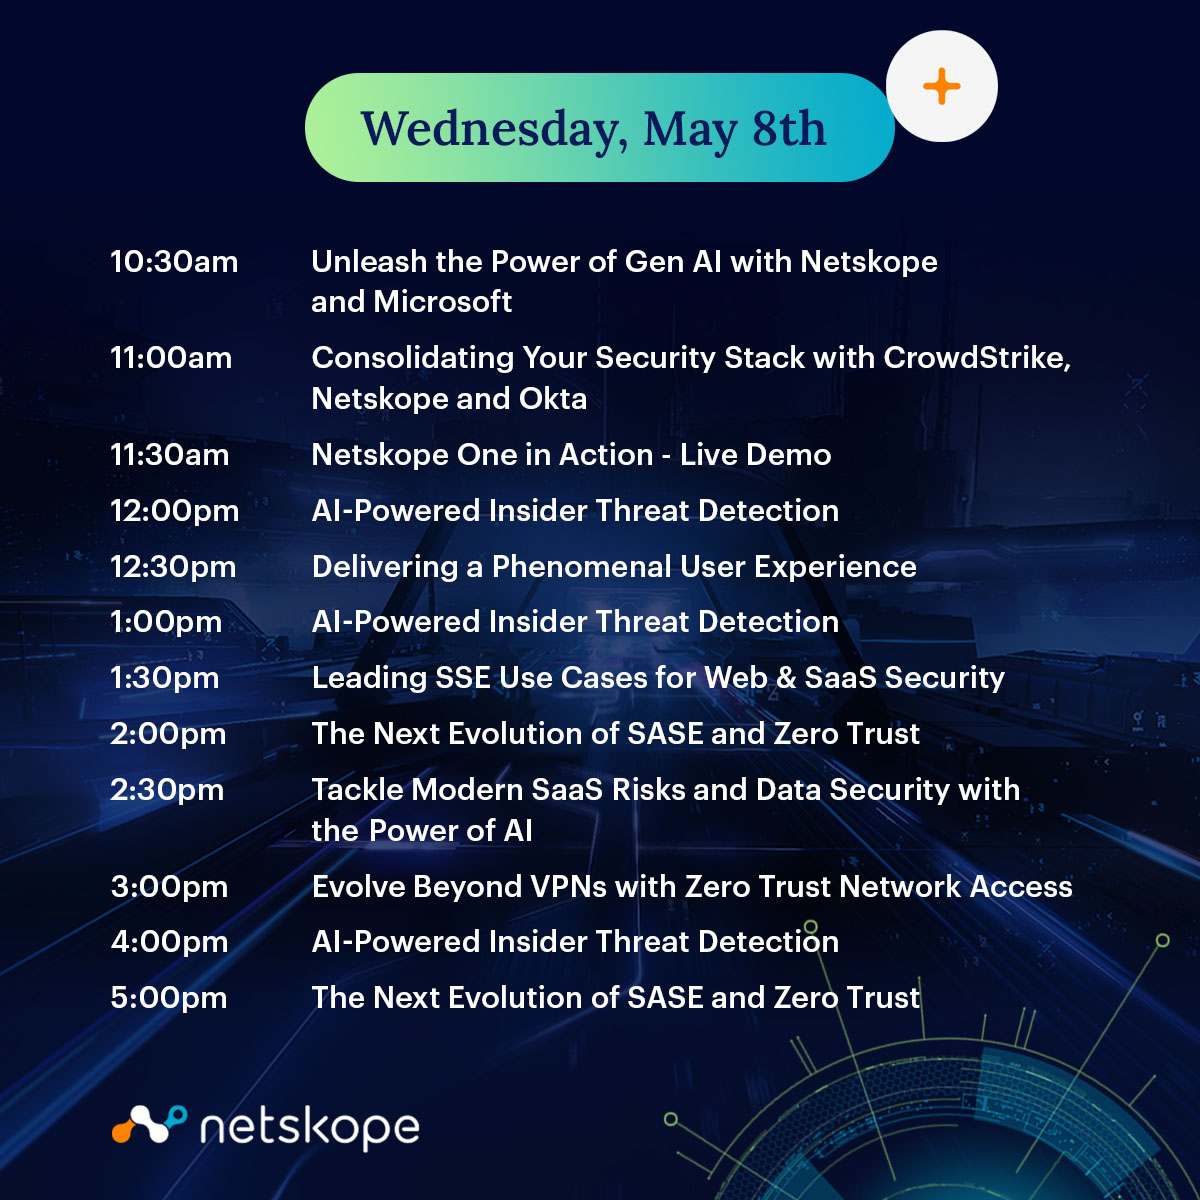 💥 We've hit the midway point of #RSAC. If you haven't had a chance yet, be sure to stop by the Netskope booth to experience the next evolution of #SASE and #ZeroTrust. 📍 Booth #1035, Moscone South 💡 Pro tip: Save this post for easy access to the schedule throughout the day.